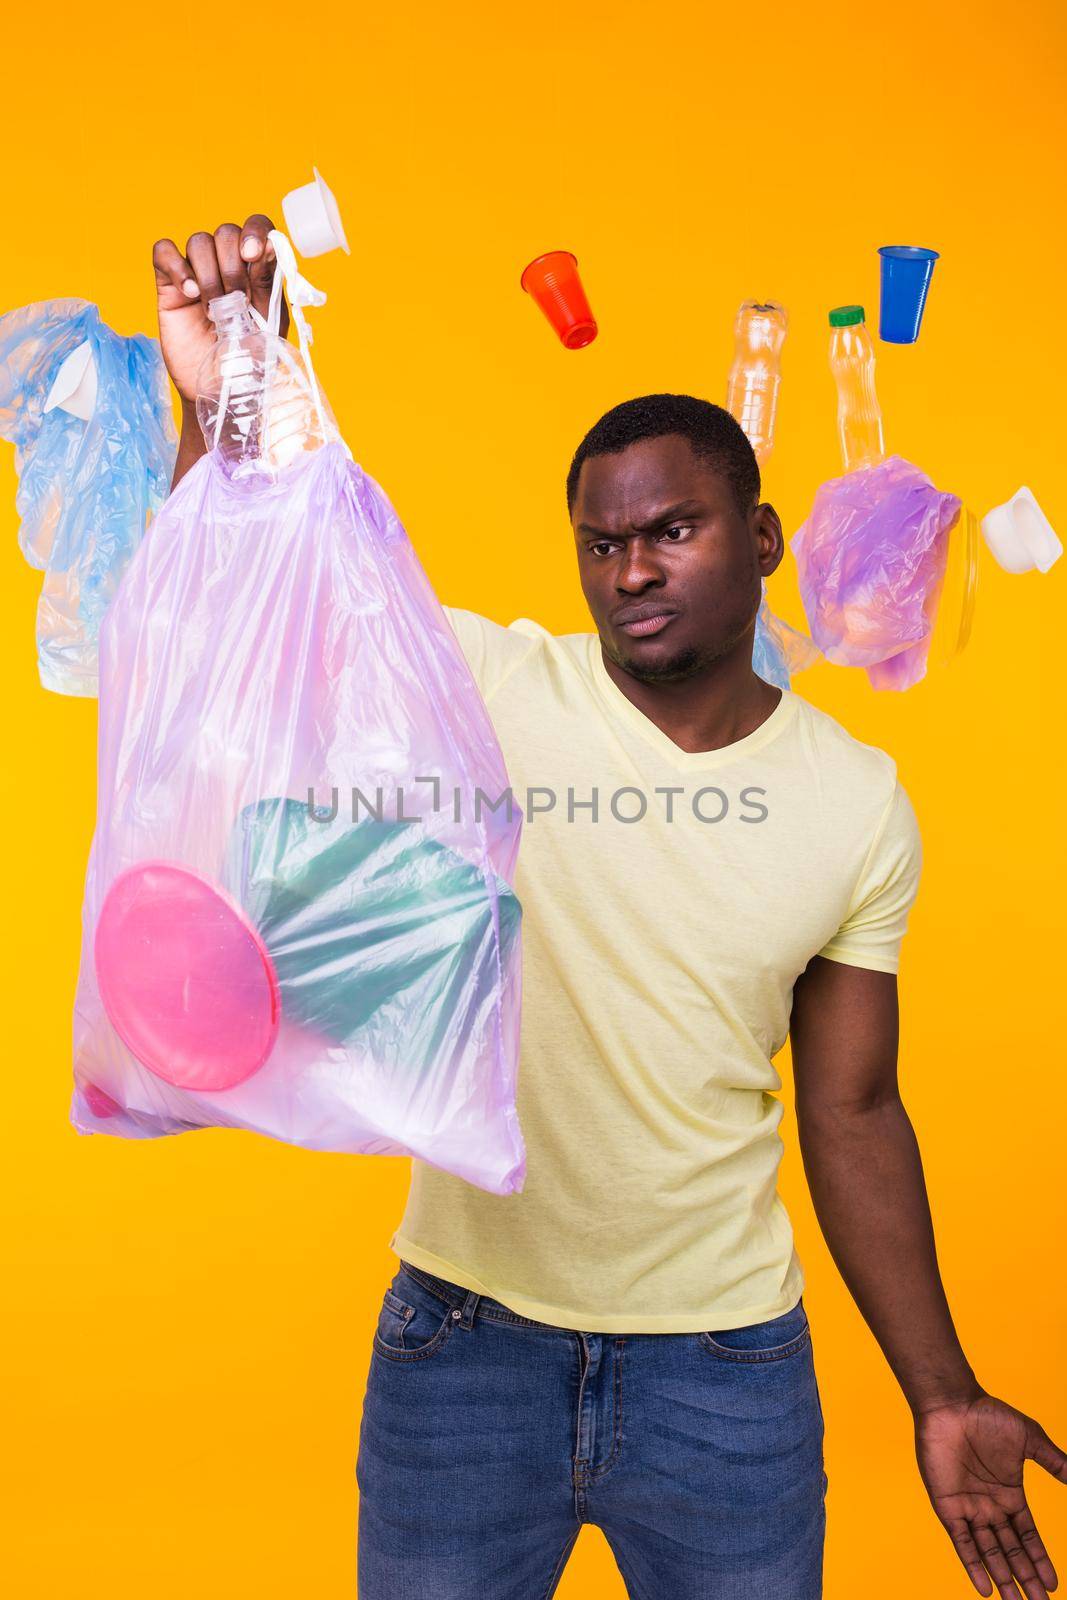 Problem of trash, plastic recycling, pollution and environmental concept - man carrying garbage bag on yellow background.